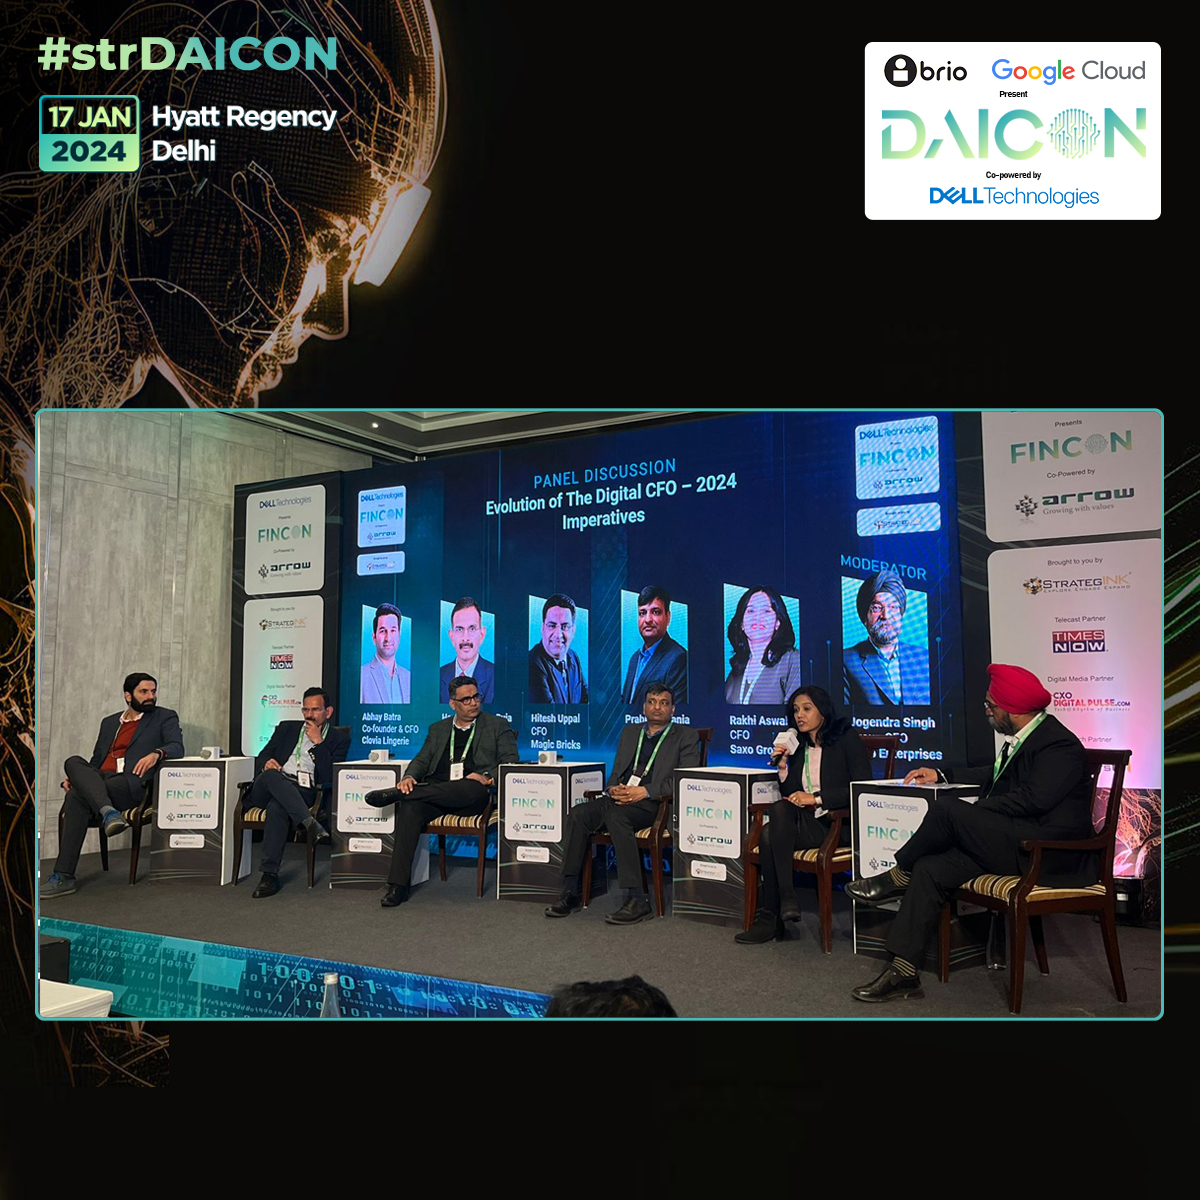 #strDAICONlive | The CFO, once reactive and transactional, is now a powerhouse of value generation and strategic engagement. A riveting panel discussion on the 'Evolution of The Digital CFO – 2024 Imperatives' is live.